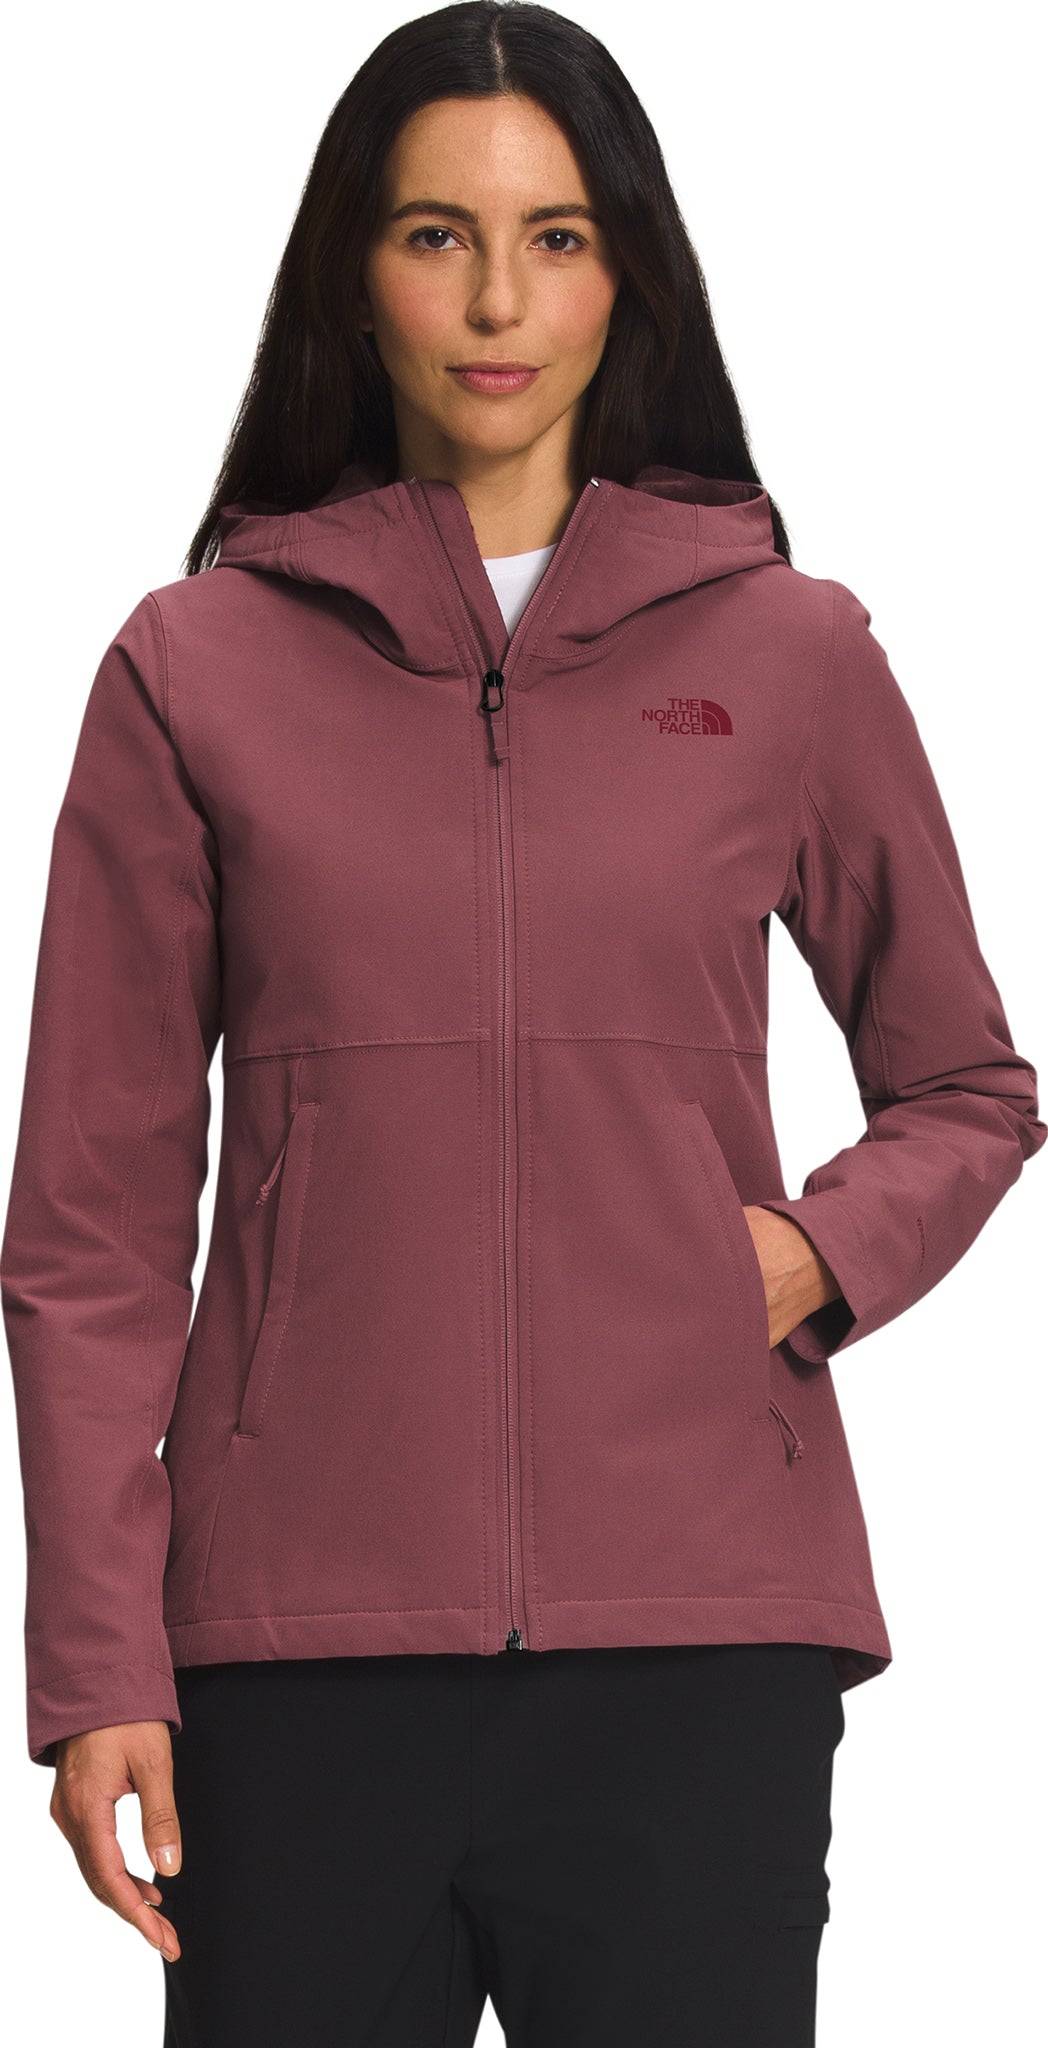 The North Face Shelbe Raschel Hoodie - Women’s | Altitude Sports